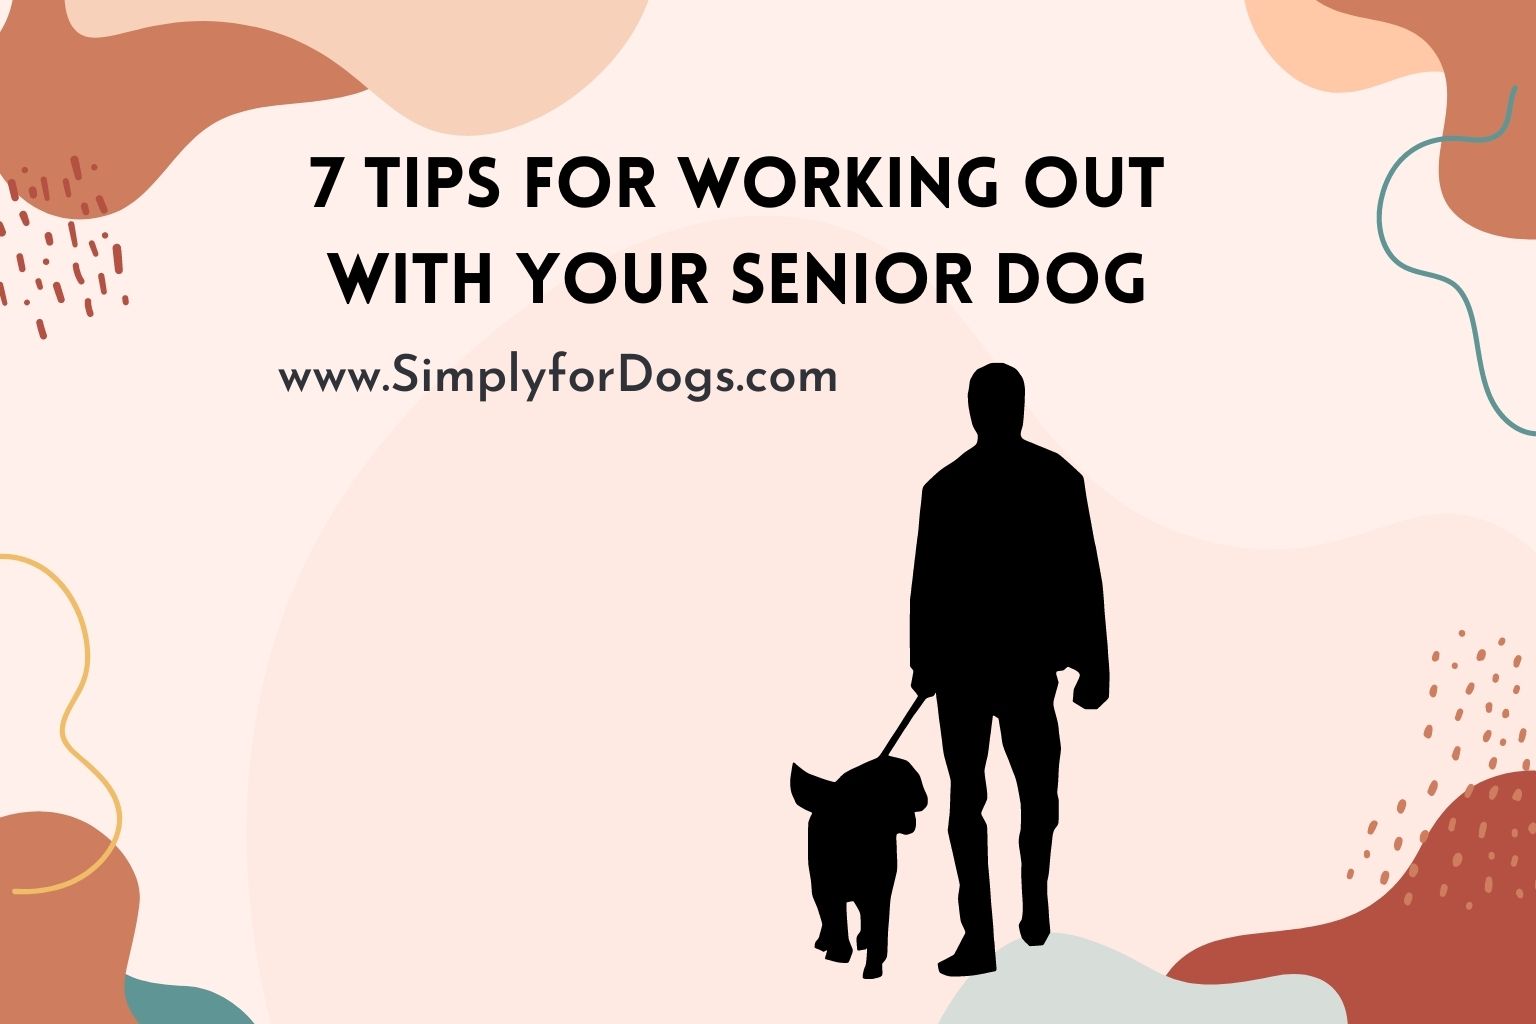 7 Tips for Working Out with Your Senior Dog